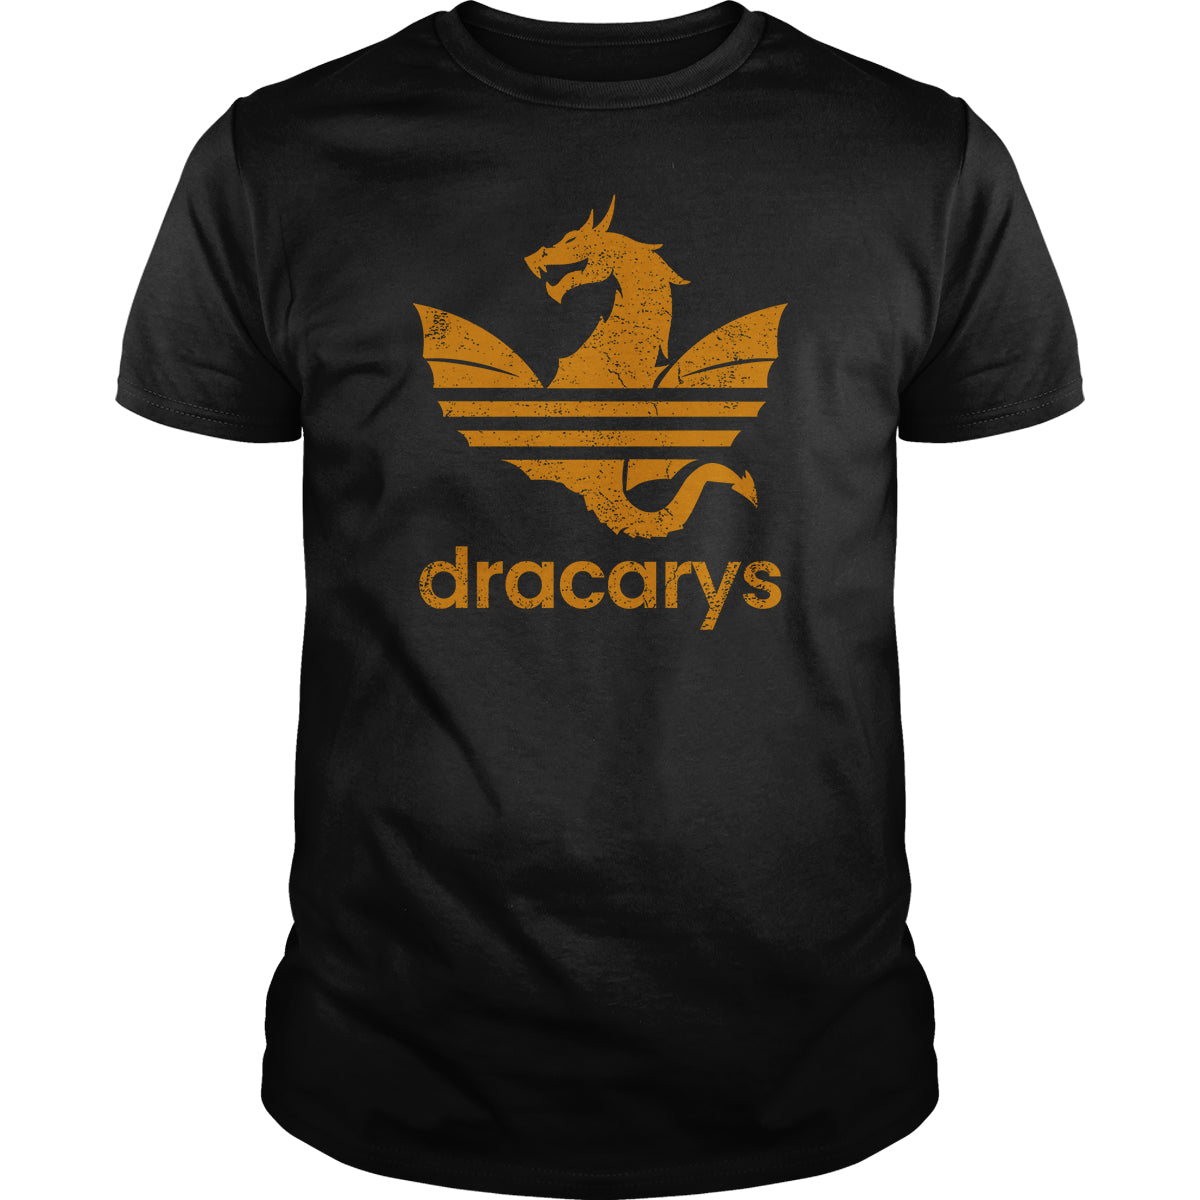 Dracarys - BustedTees.com